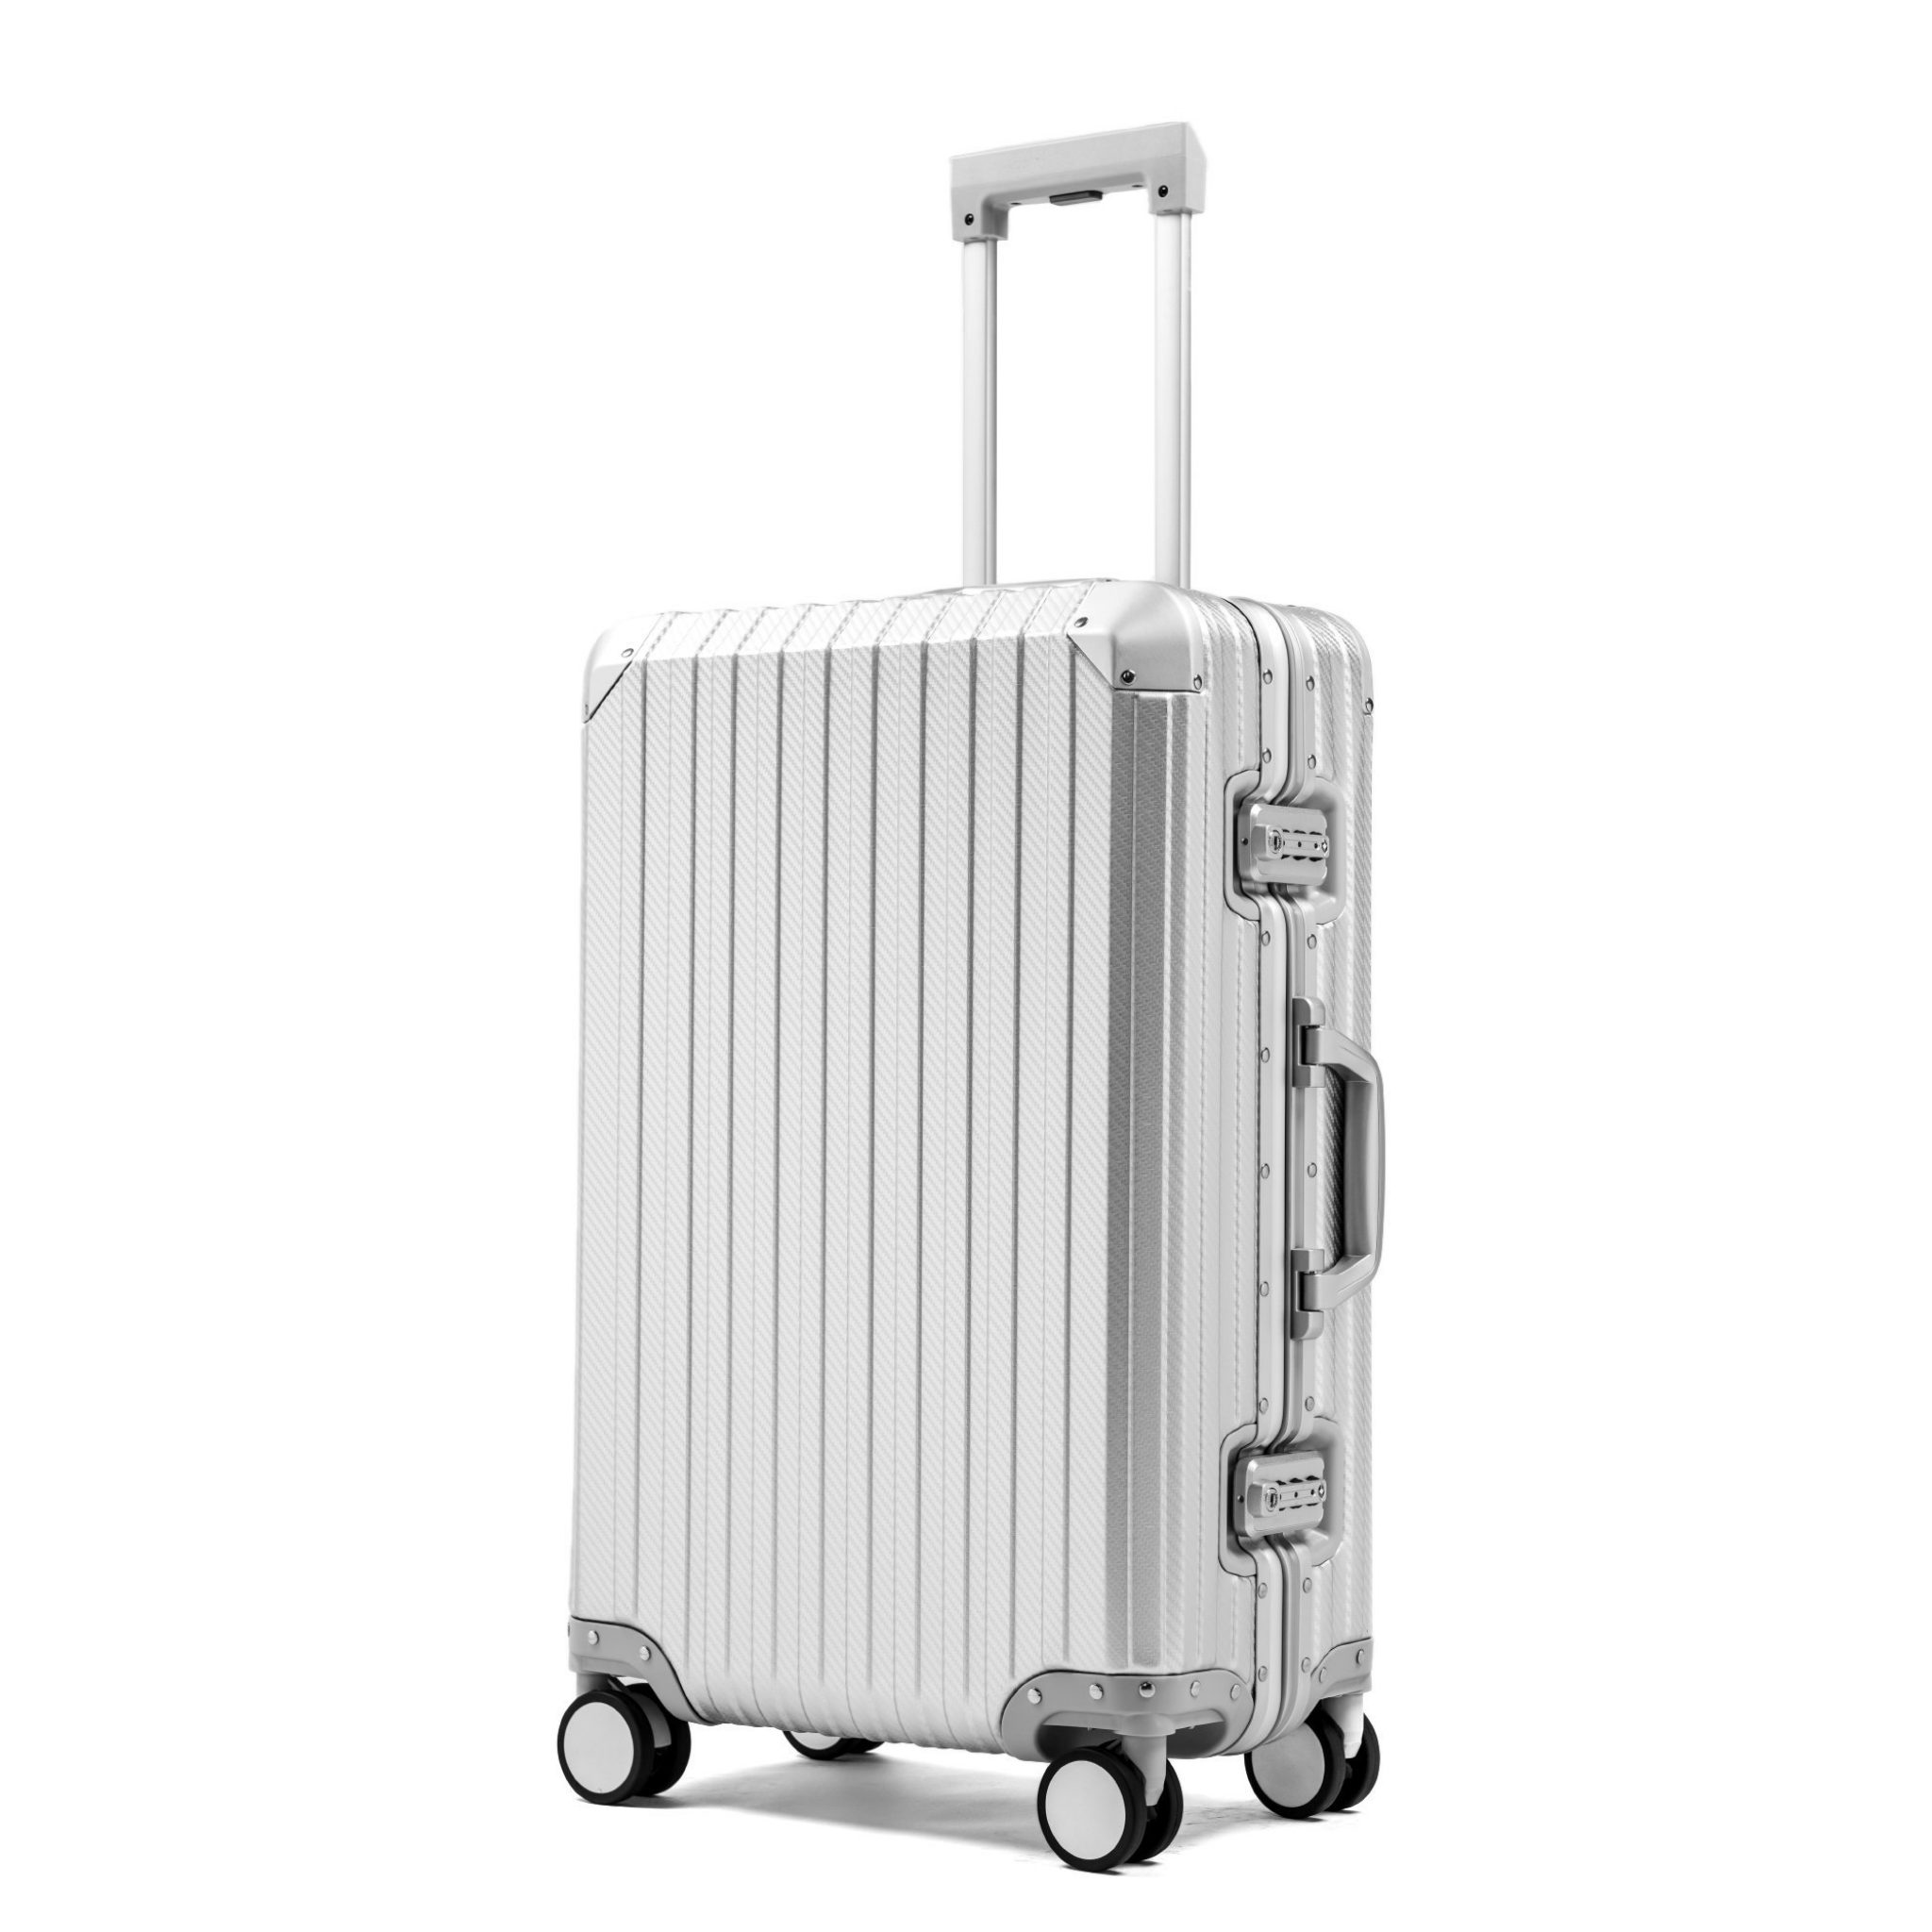 MVST Select Our List of the Best MVST Luggage Luggage & Travel